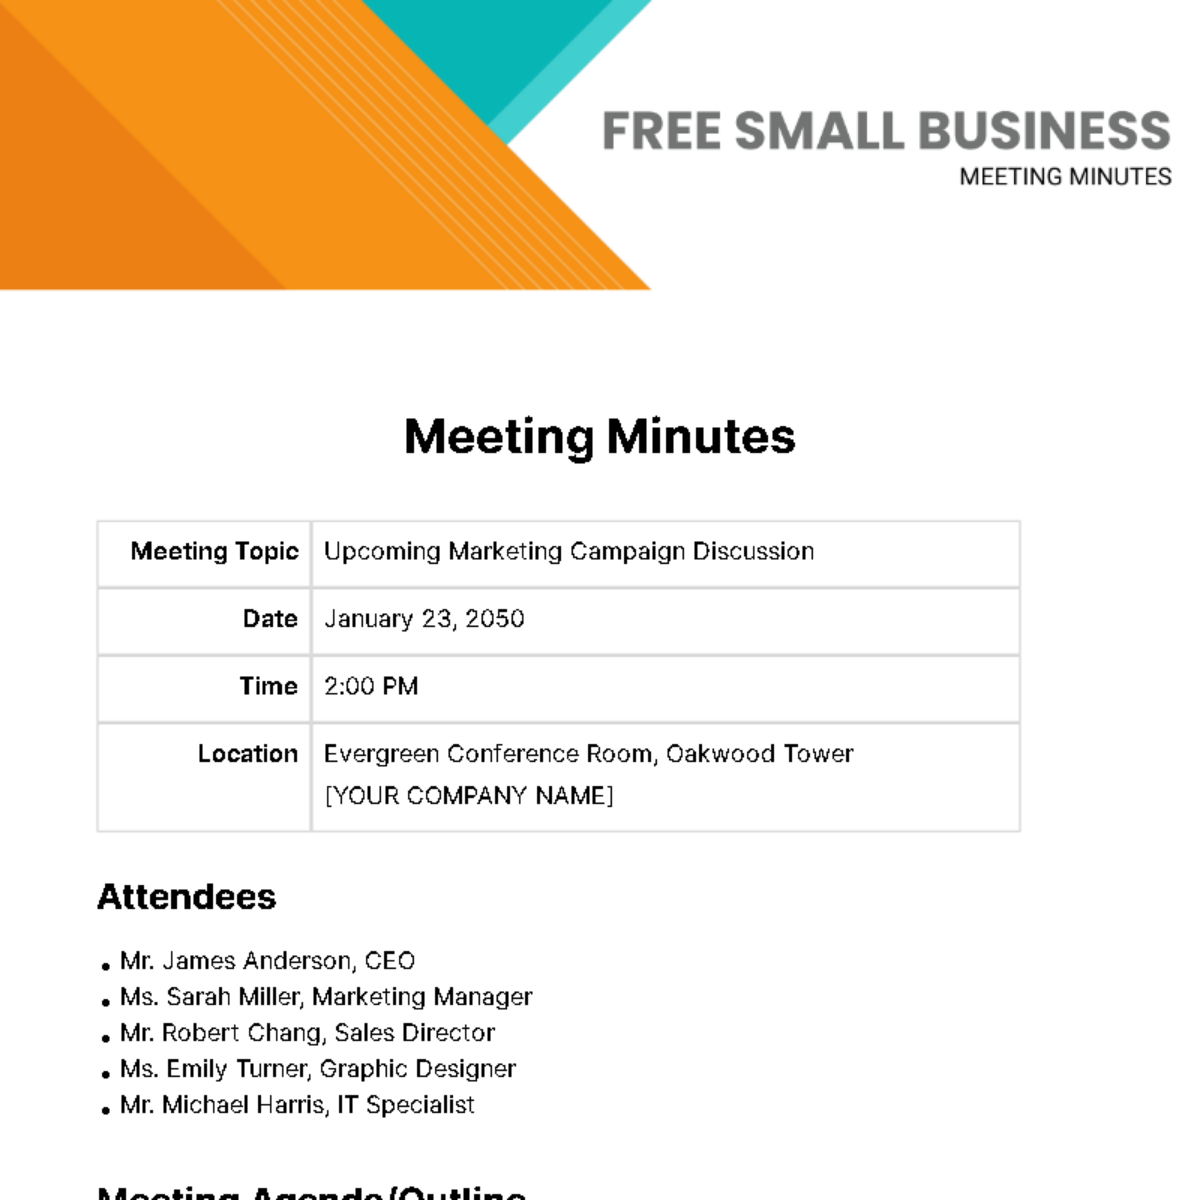 Small Business Meeting Minutes  Template